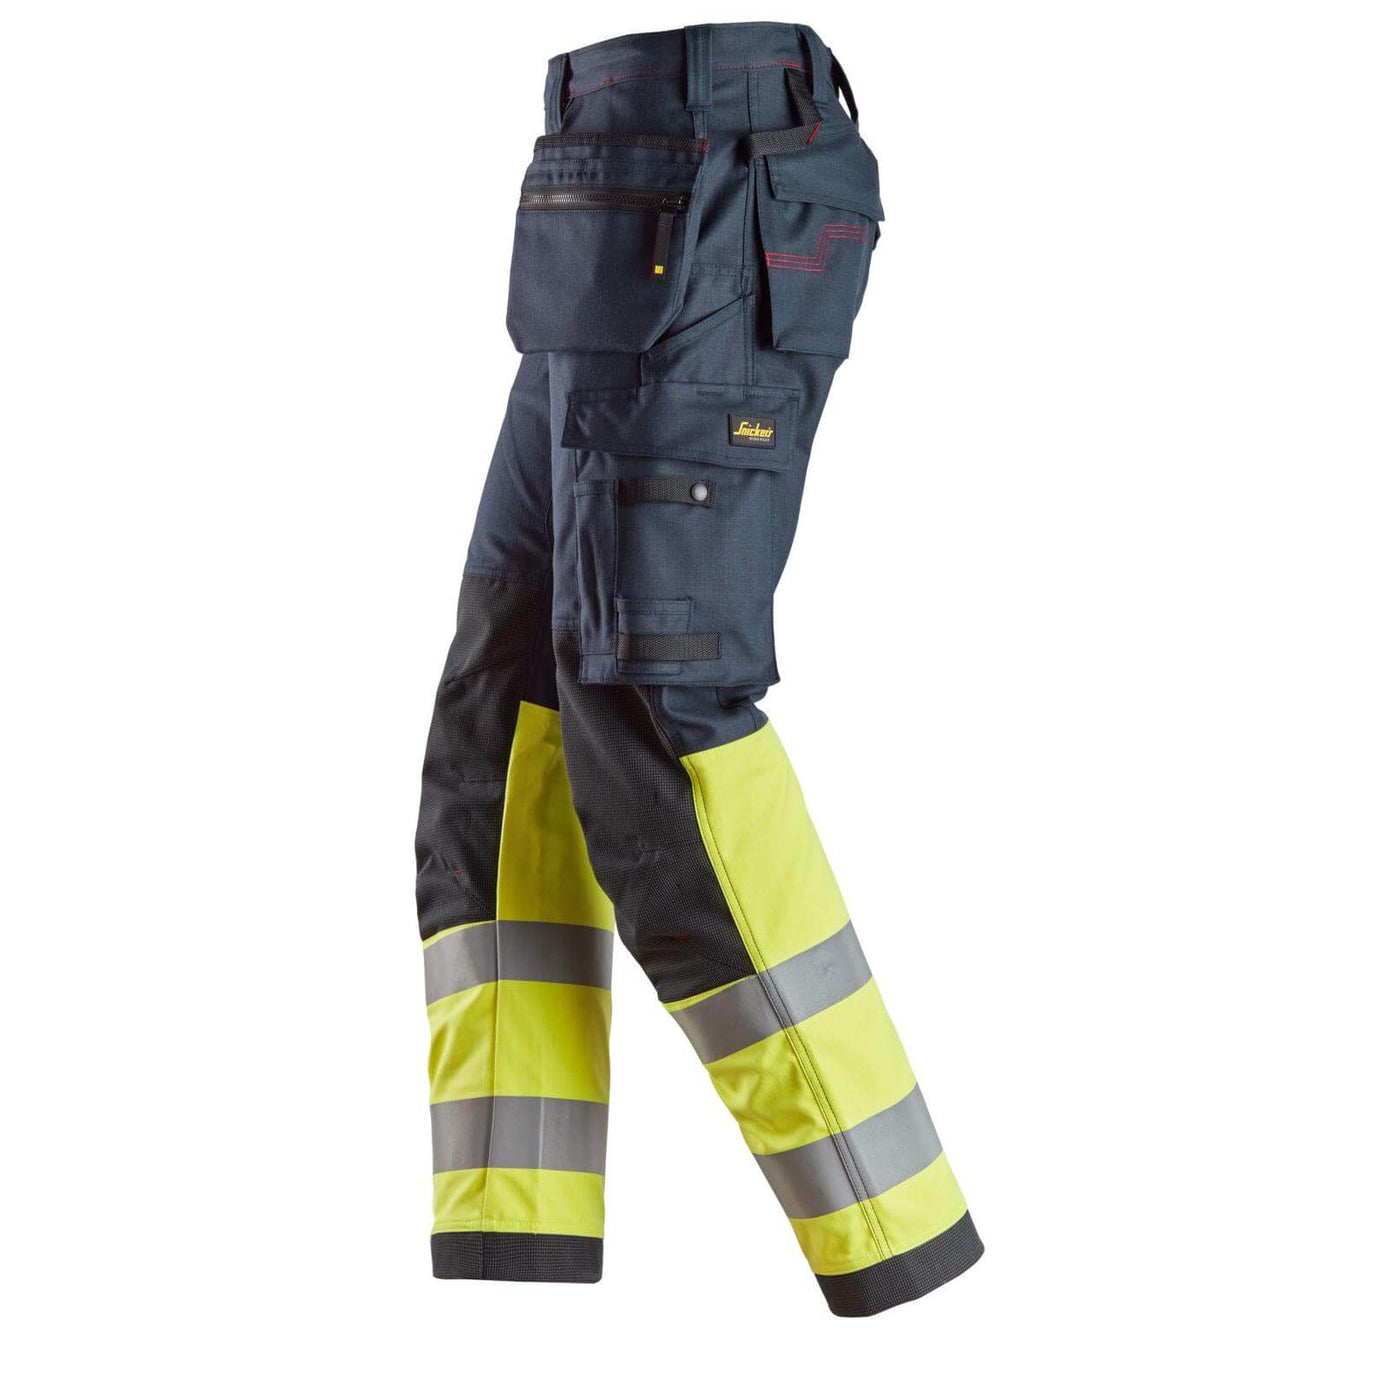 Snickers 6263 ProtecWork Hi Vis Work Trousers with Holster Pockets Class 1 Navy Hi Visibilty Yellow left3710034 #colour_navy-hi-visibilty-yellow